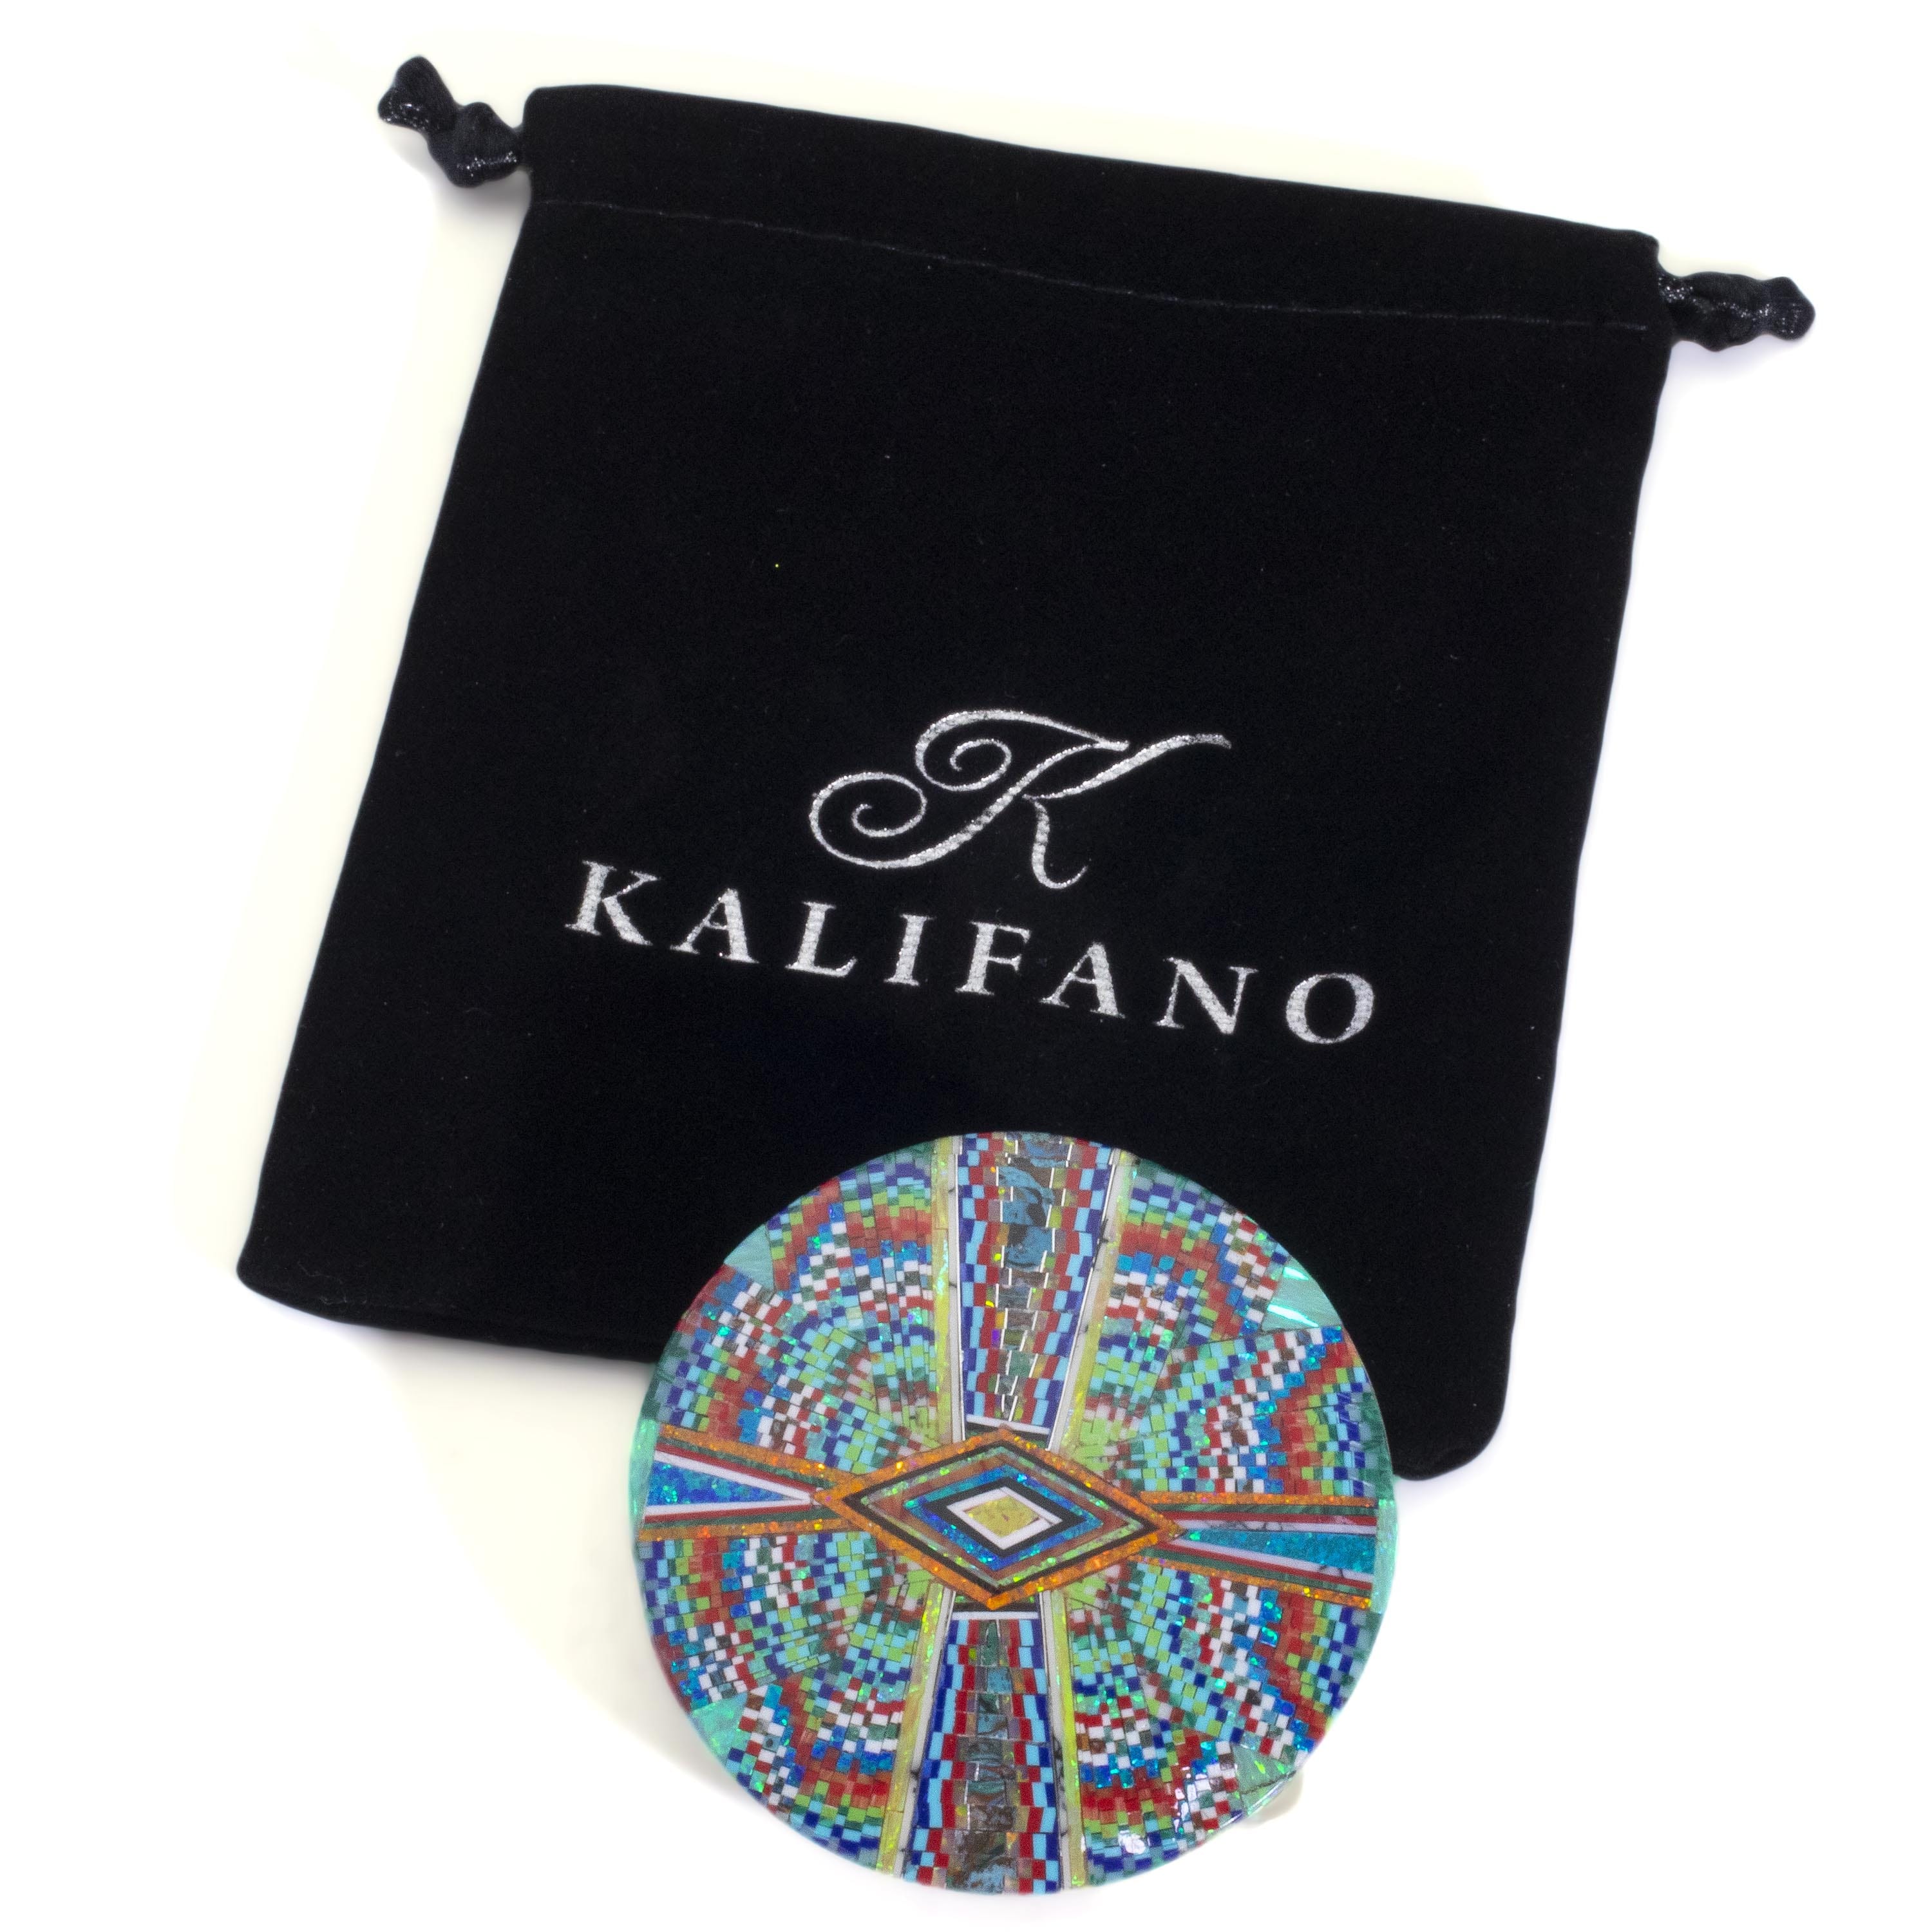 KALIFANO Southwest Silver Jewelry Multi Gem Opal Micro Inlay with Genuine Turquoise 925 Sterling Silver Circular Belt Buckle AKBB1200.004